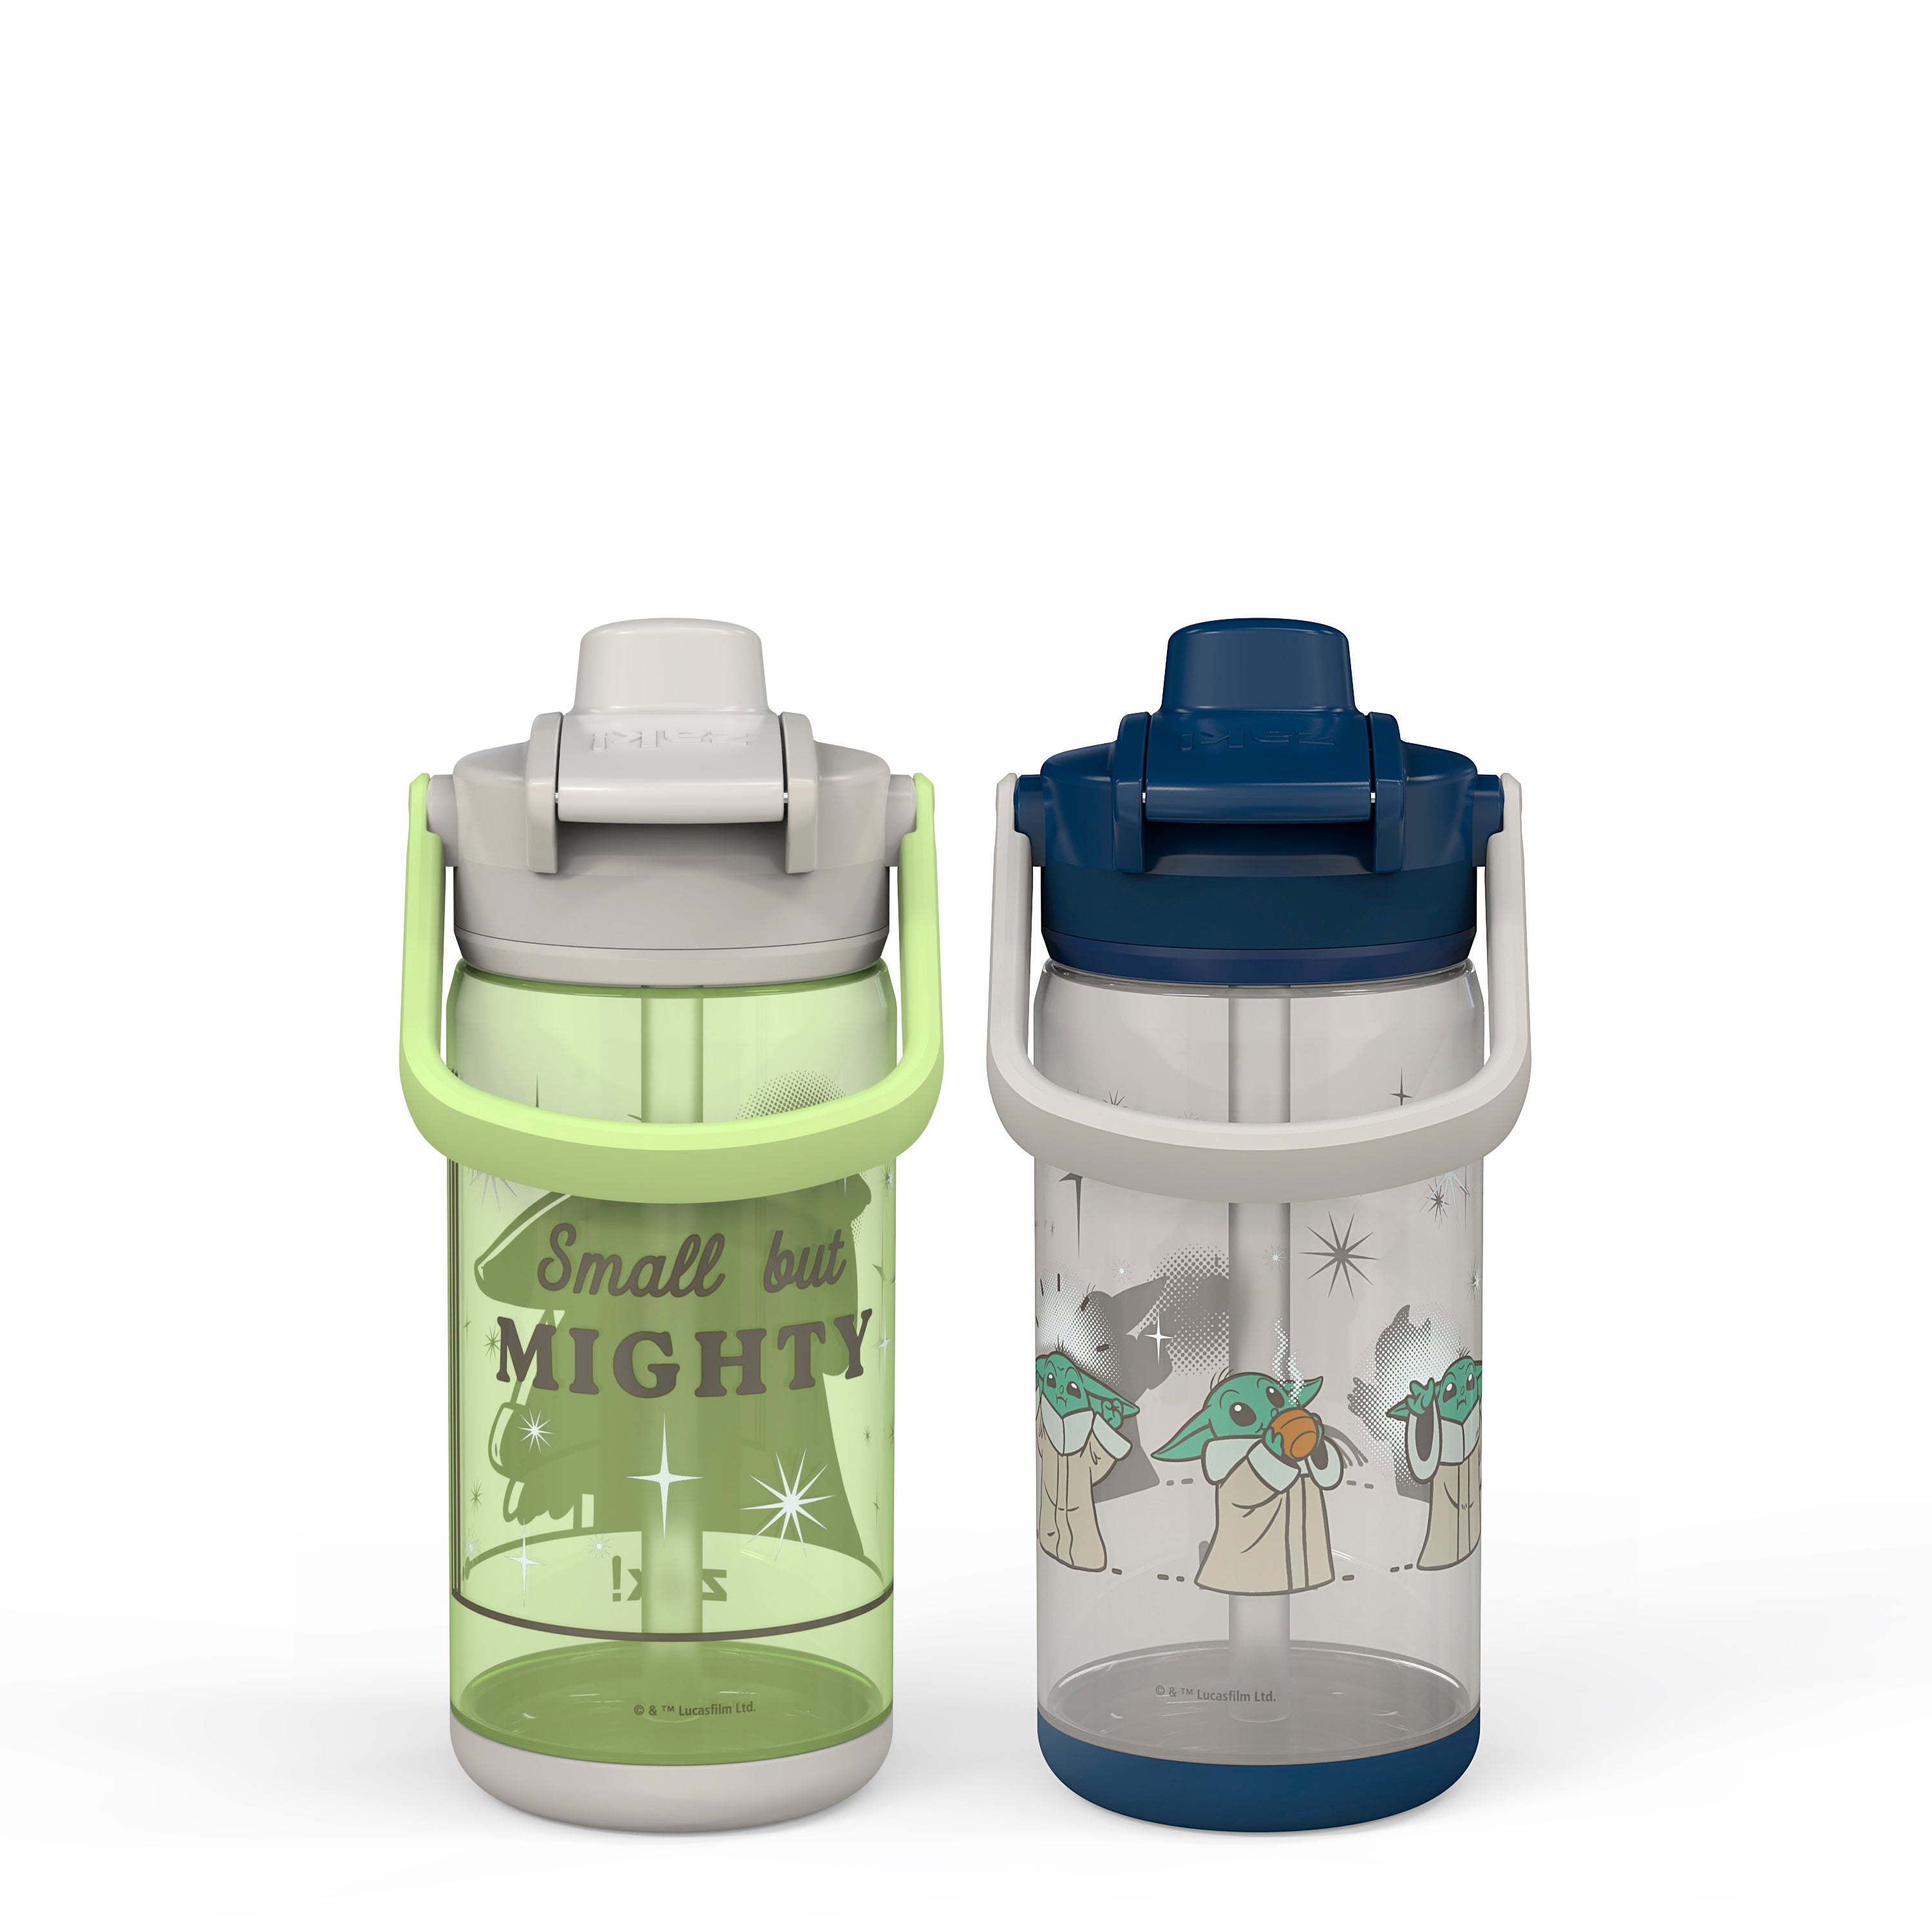 Star Wars Grogu Baby Yoda Beacon 2-Piece Kids Water Bottle Set with Covered Spout, 16 Ounces